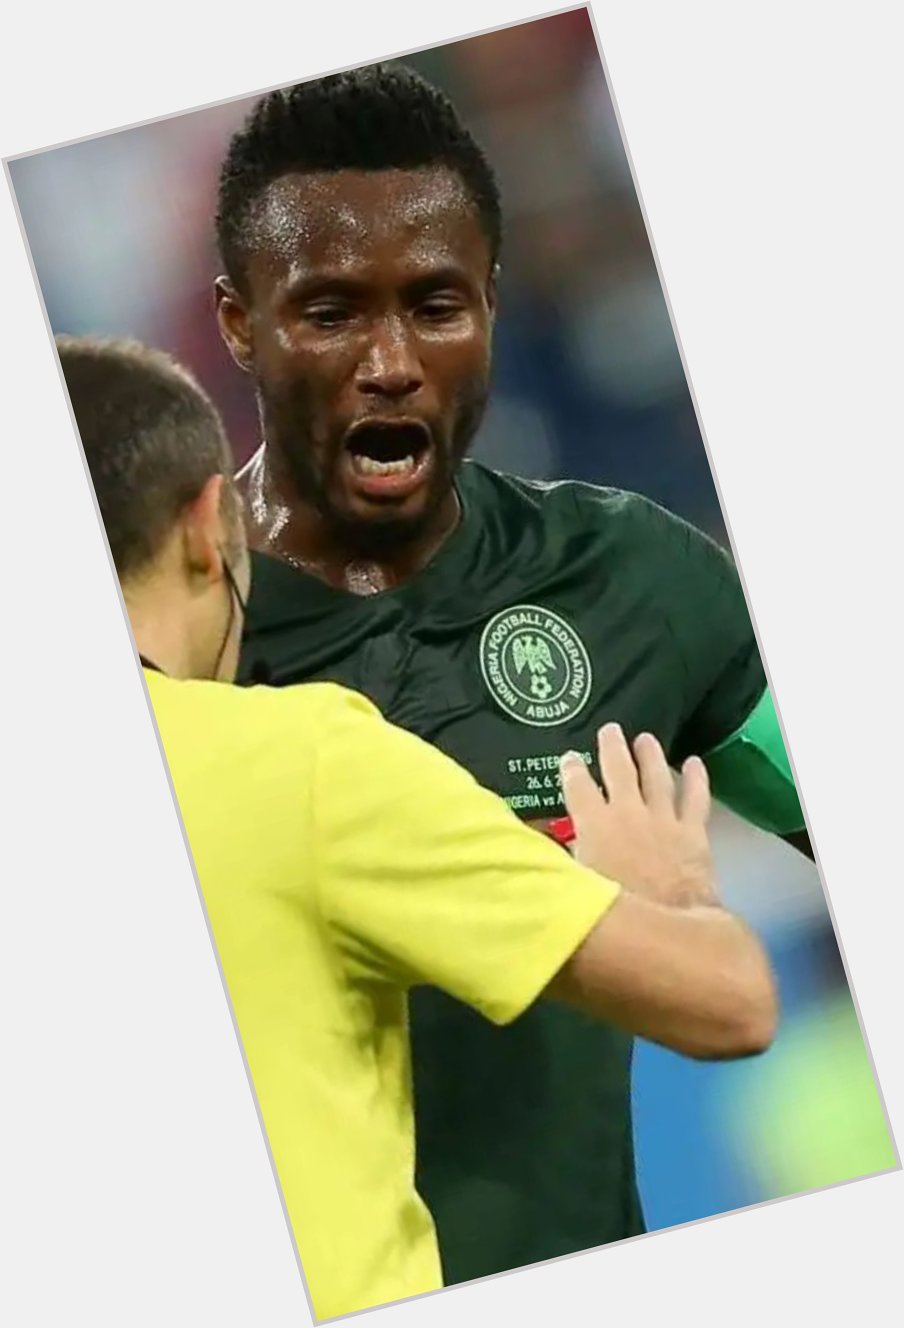 Happy belated birthday to Mikel Obi Formal Super Eagle of Nigeria skipo and Chealse legend 